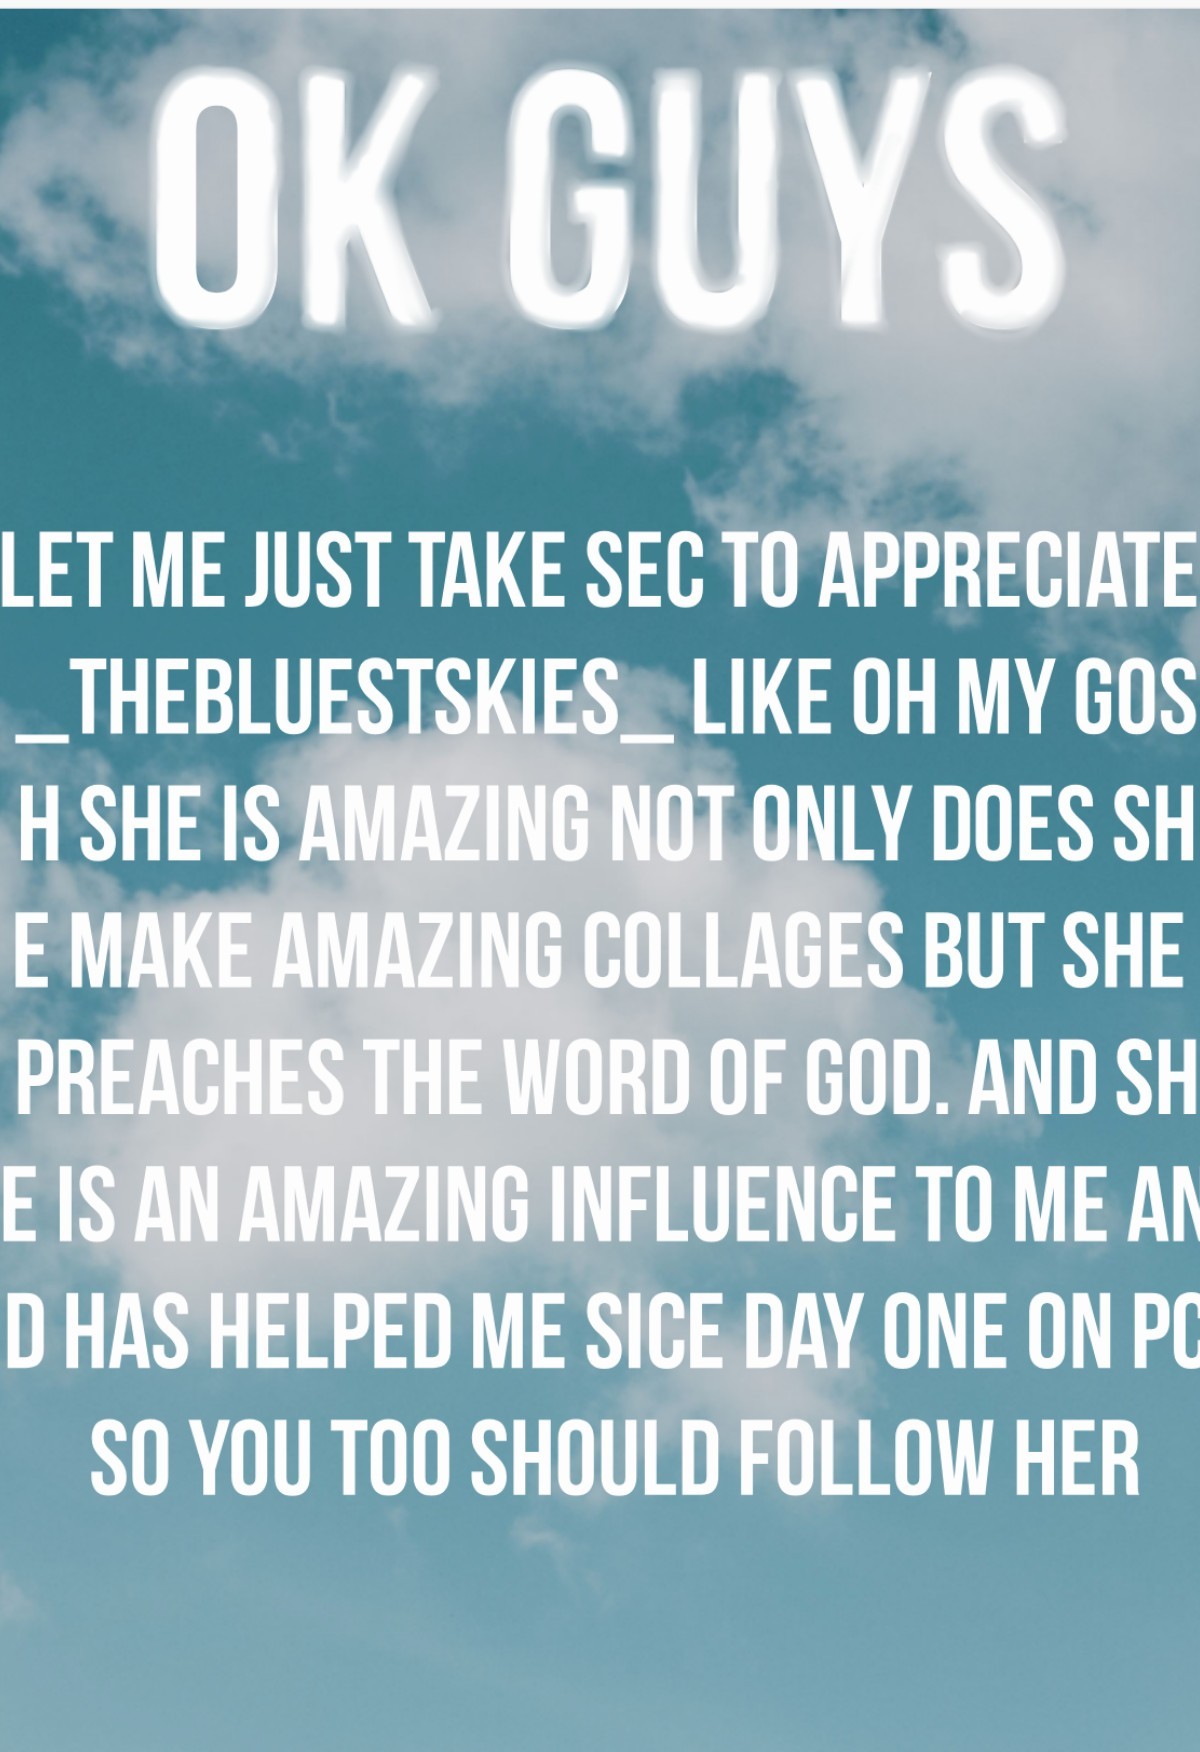 Tap
Let me just take sec to appreciate _TheBluestSkies_ like oh my gosh she is amazing not only does she make amazing collages but she preaches the word of God. And she is an amazing influence to me and has helped me sice day one on pc so you too should f